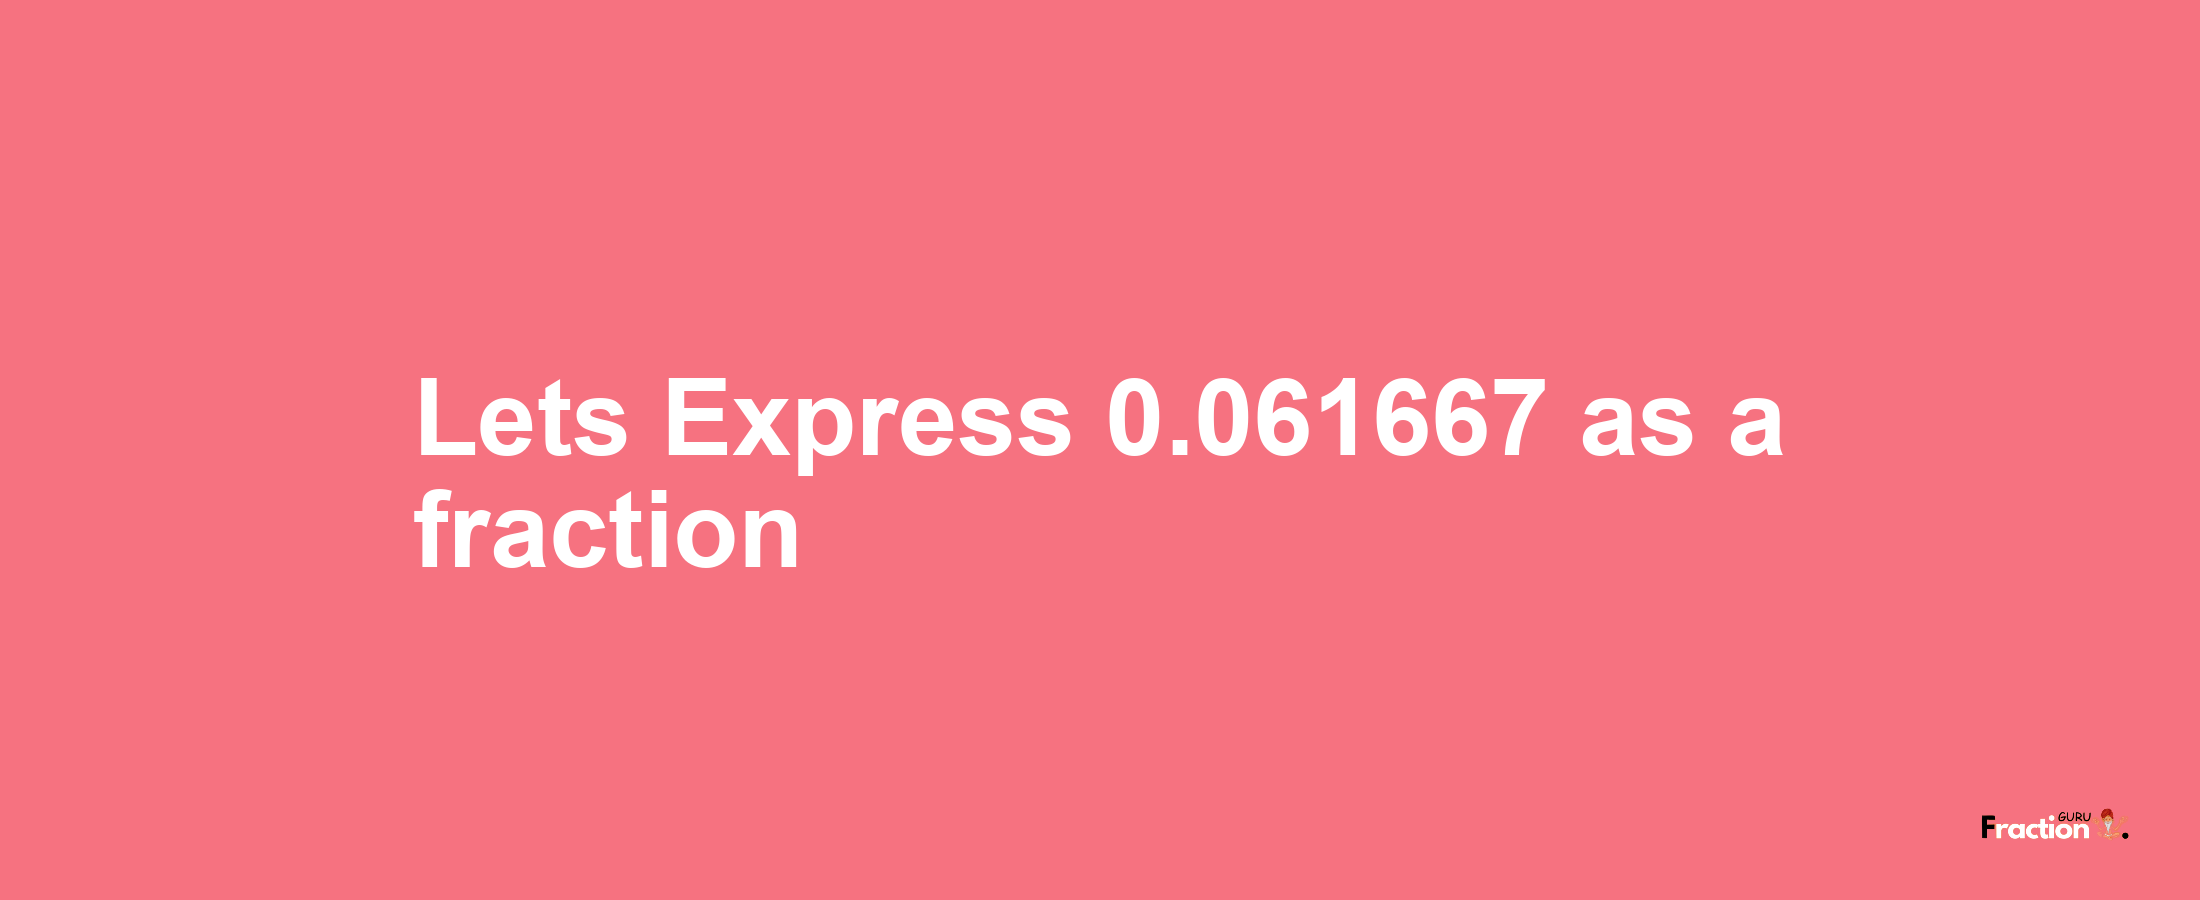 Lets Express 0.061667 as afraction